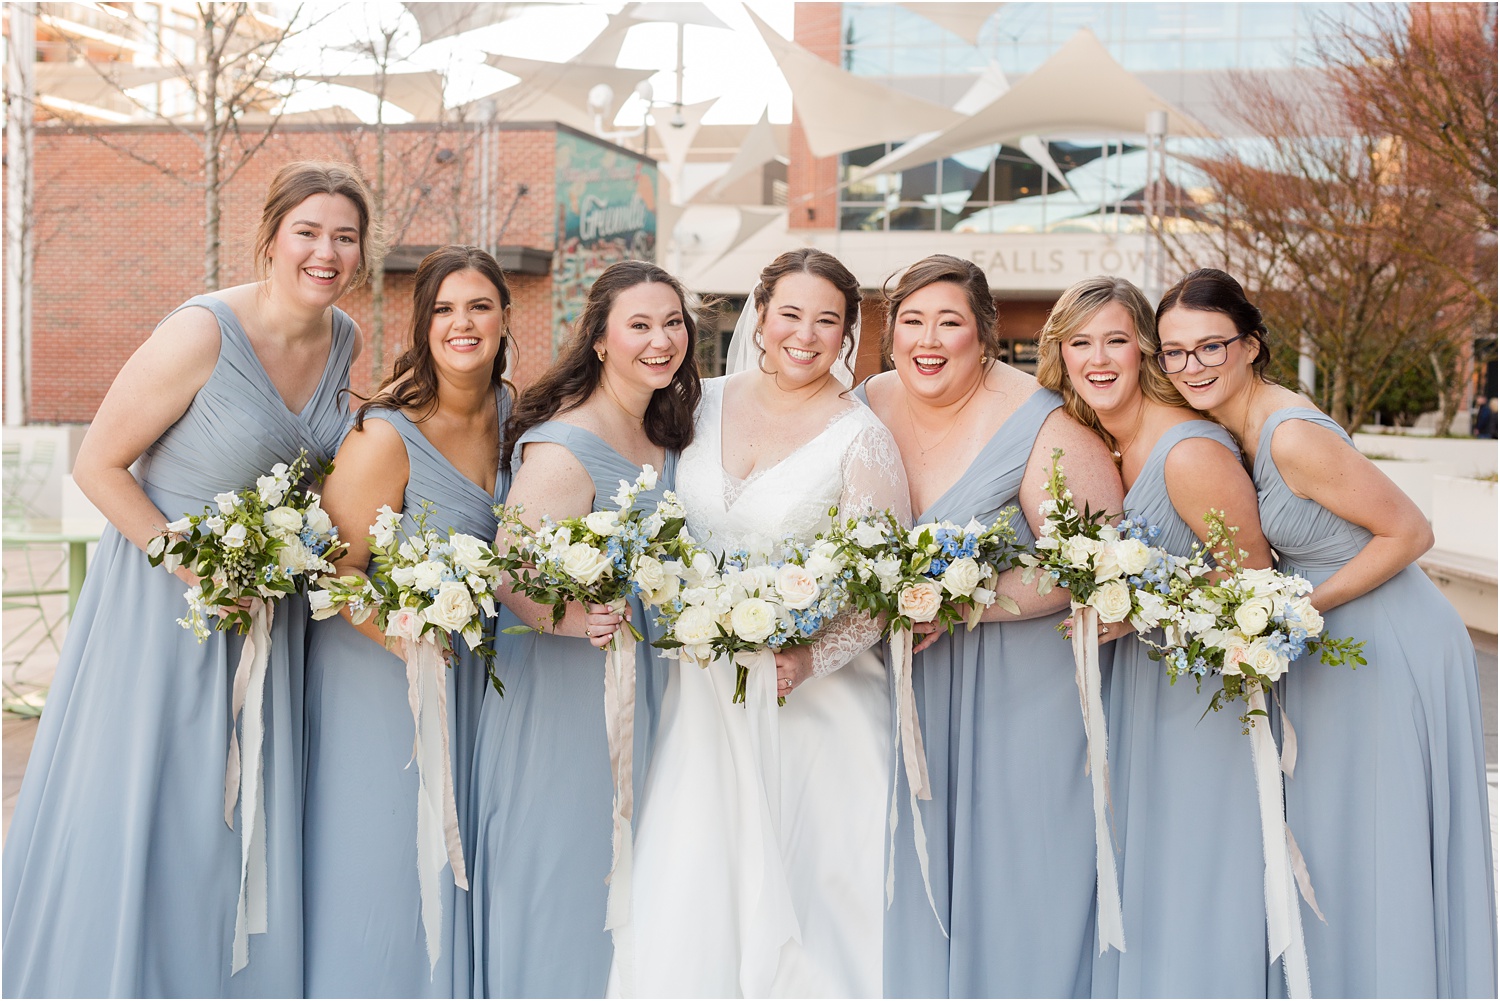 Winter Wedding with Icy Blues at Huguenot Loft